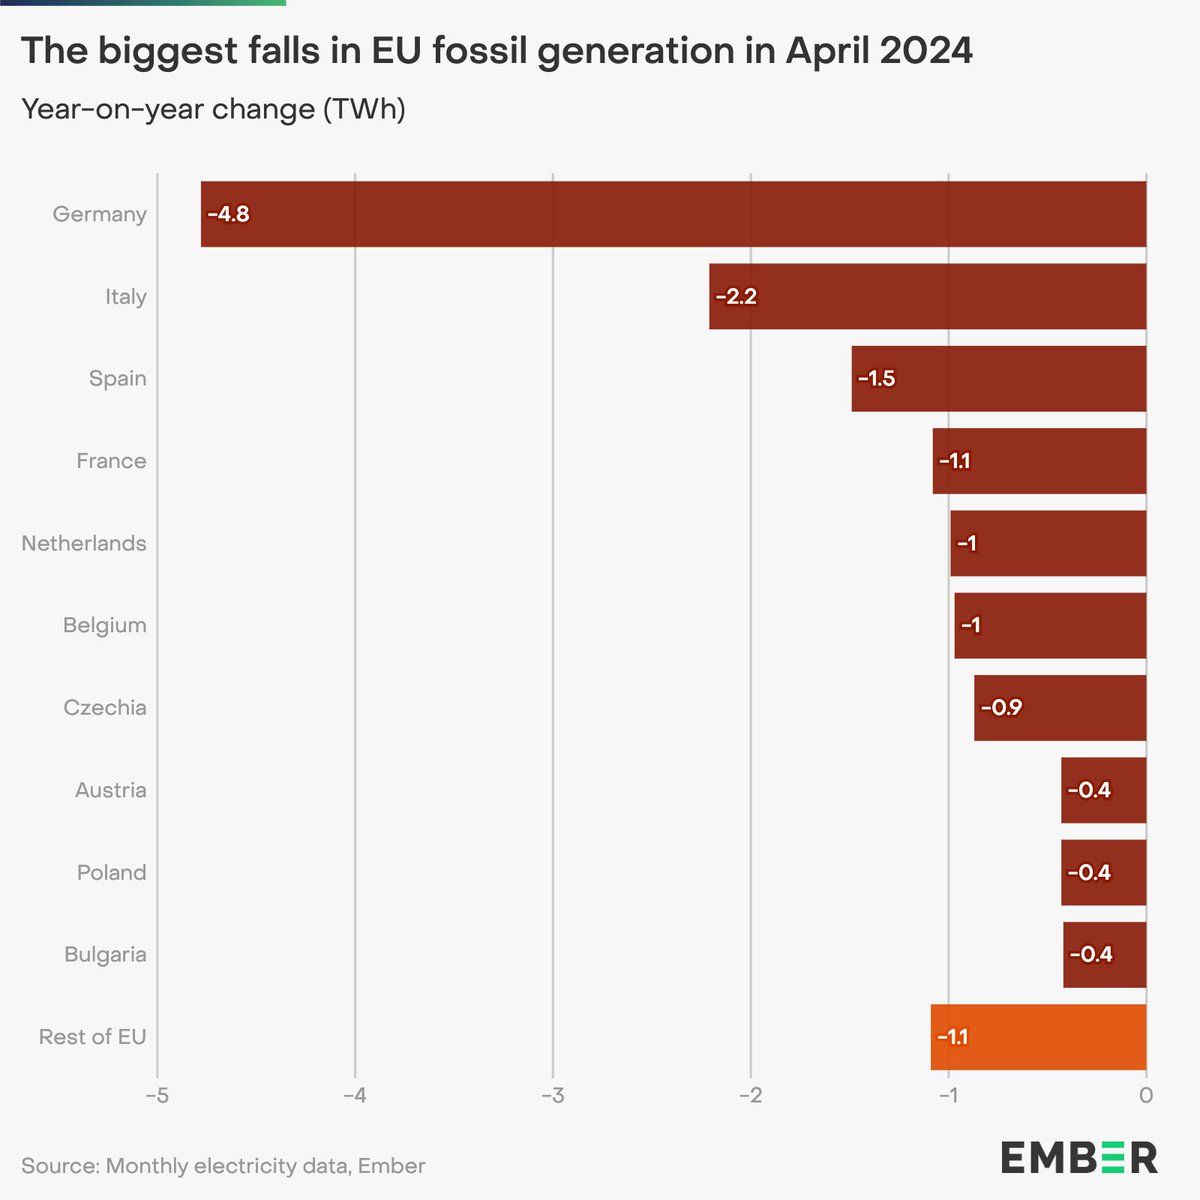 🇪🇺 generation from fossil fuels in April 2024 fell by 24% compared to April 2023. 🇩🇪 Germany saw the largest fall compared to last year, at 4.8 TWh (-26%), representing 32% of the total EU fall. 🇮🇹 Italy was next, with a 2.2 TWh (-24%) fall. ember-climate.org/insights/in-br…